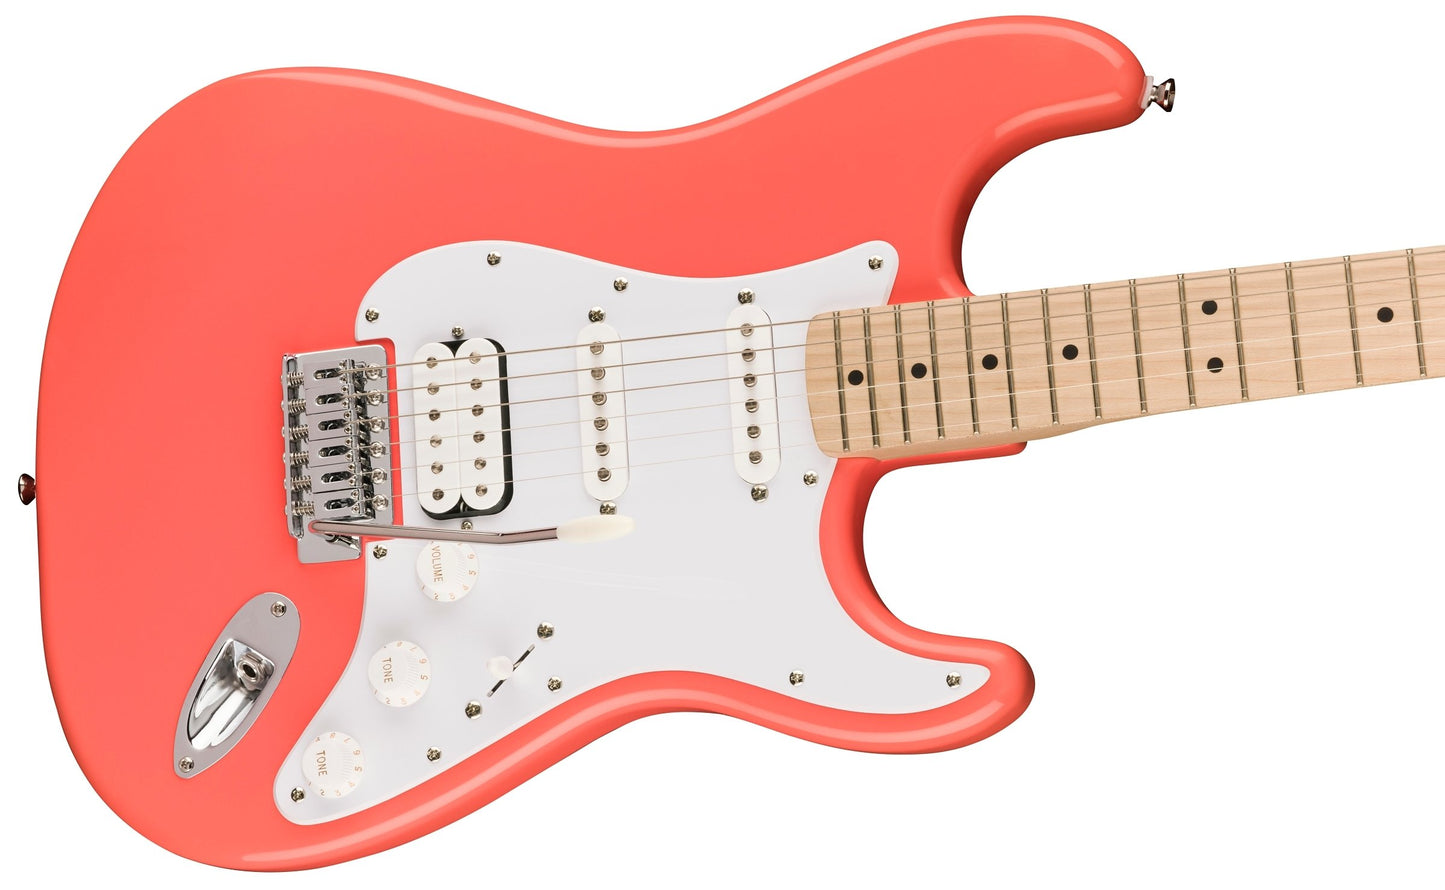 Squier Sonic Stratocaster HSS Tahitian Coral